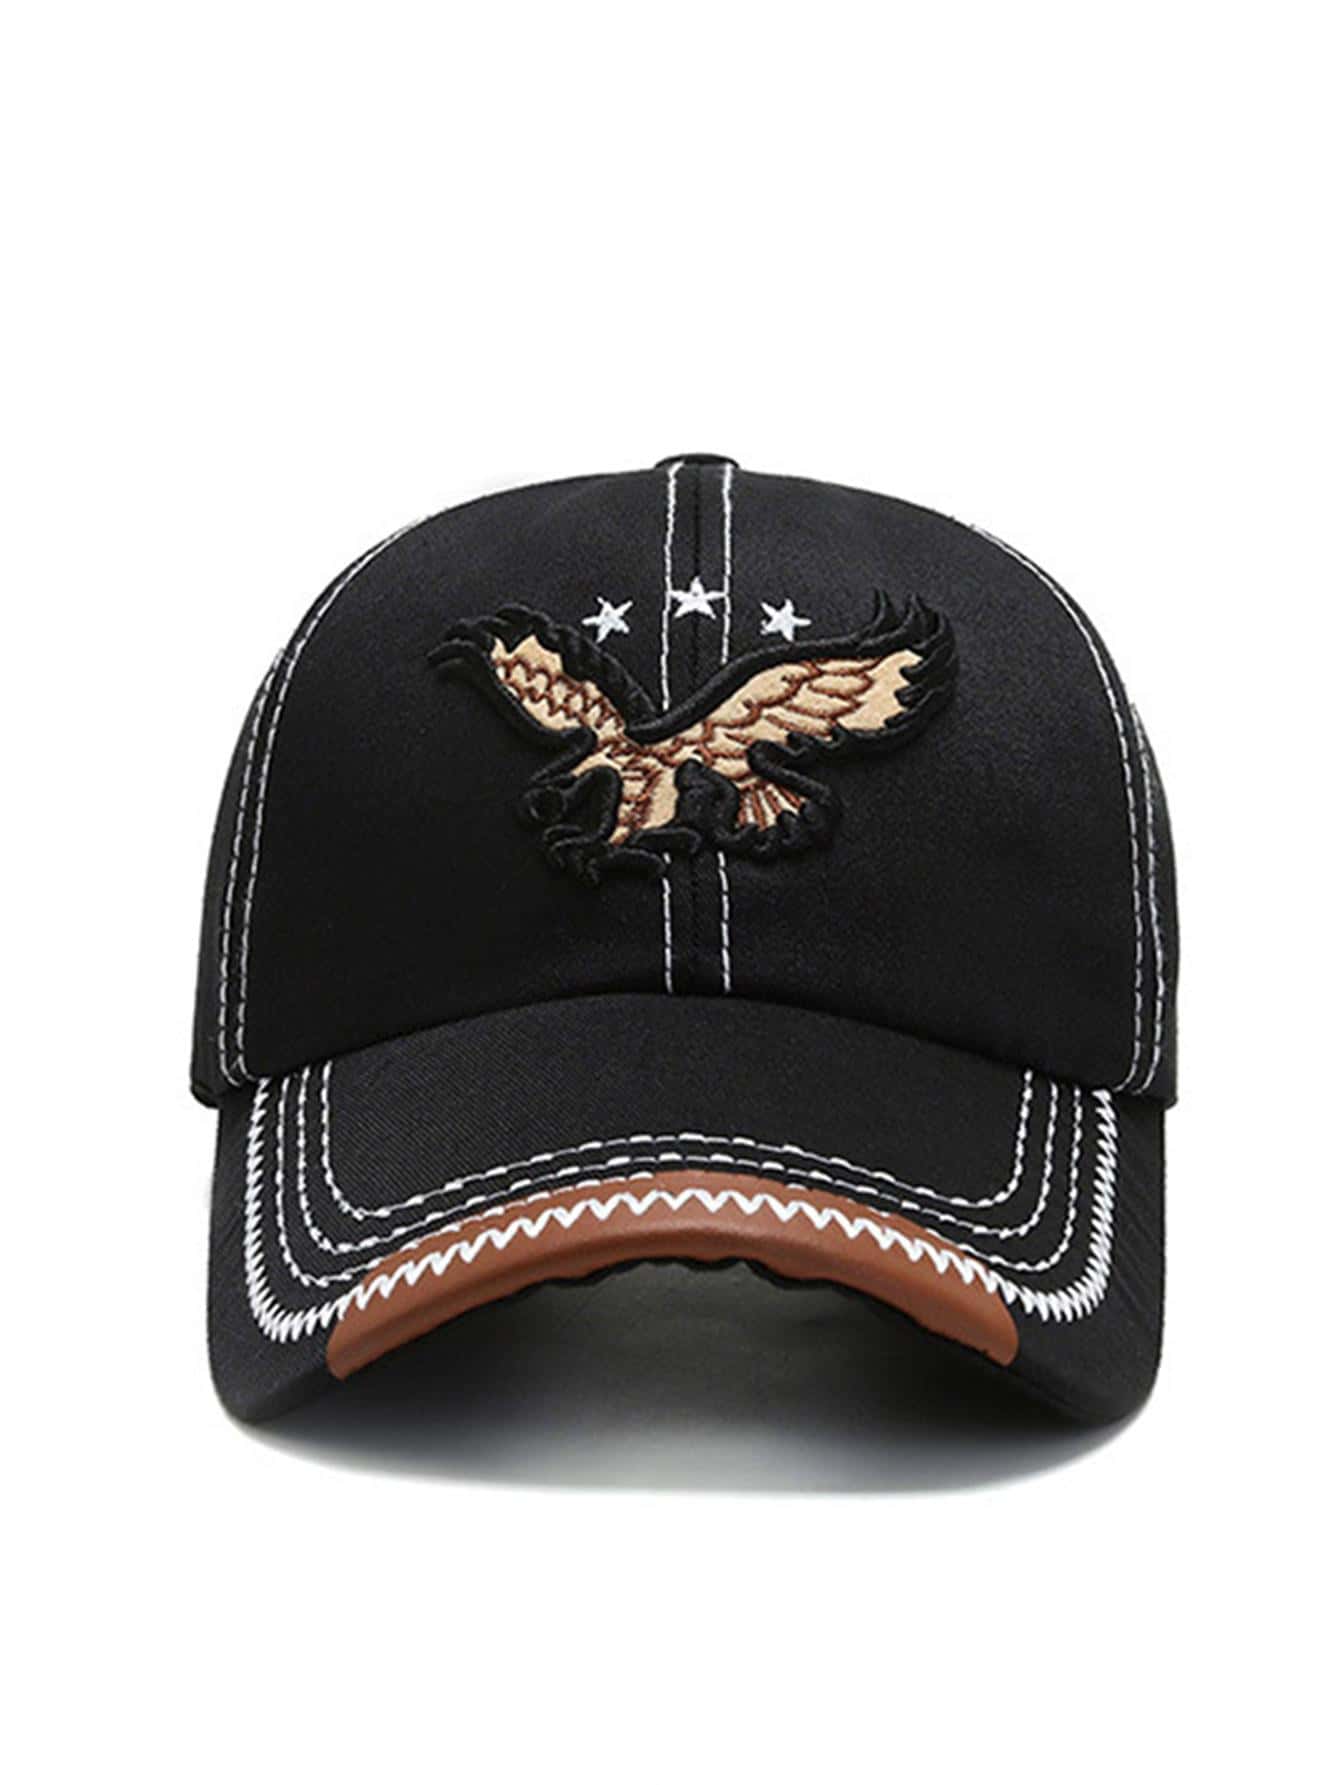 Men's Eagle Embroidered Baseball Cap Hat in Assorted Designs💜